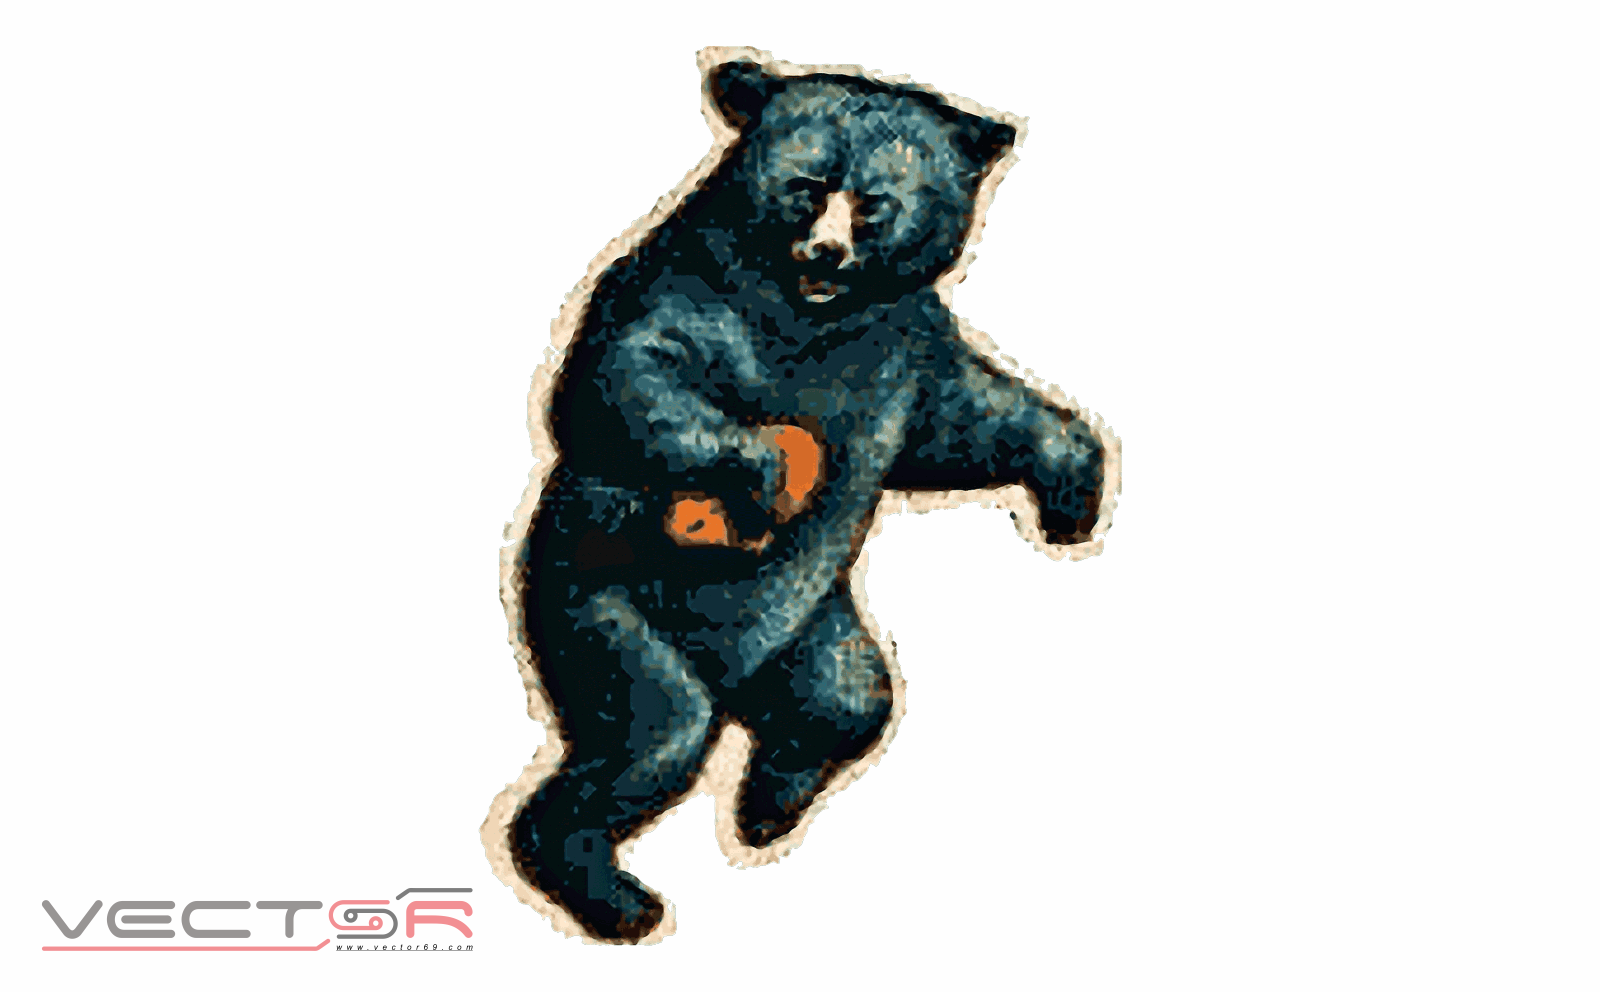 Chicago Bears 1940-1945 Logo - Download Transparent Images, Portable Network Graphics (.PNG)